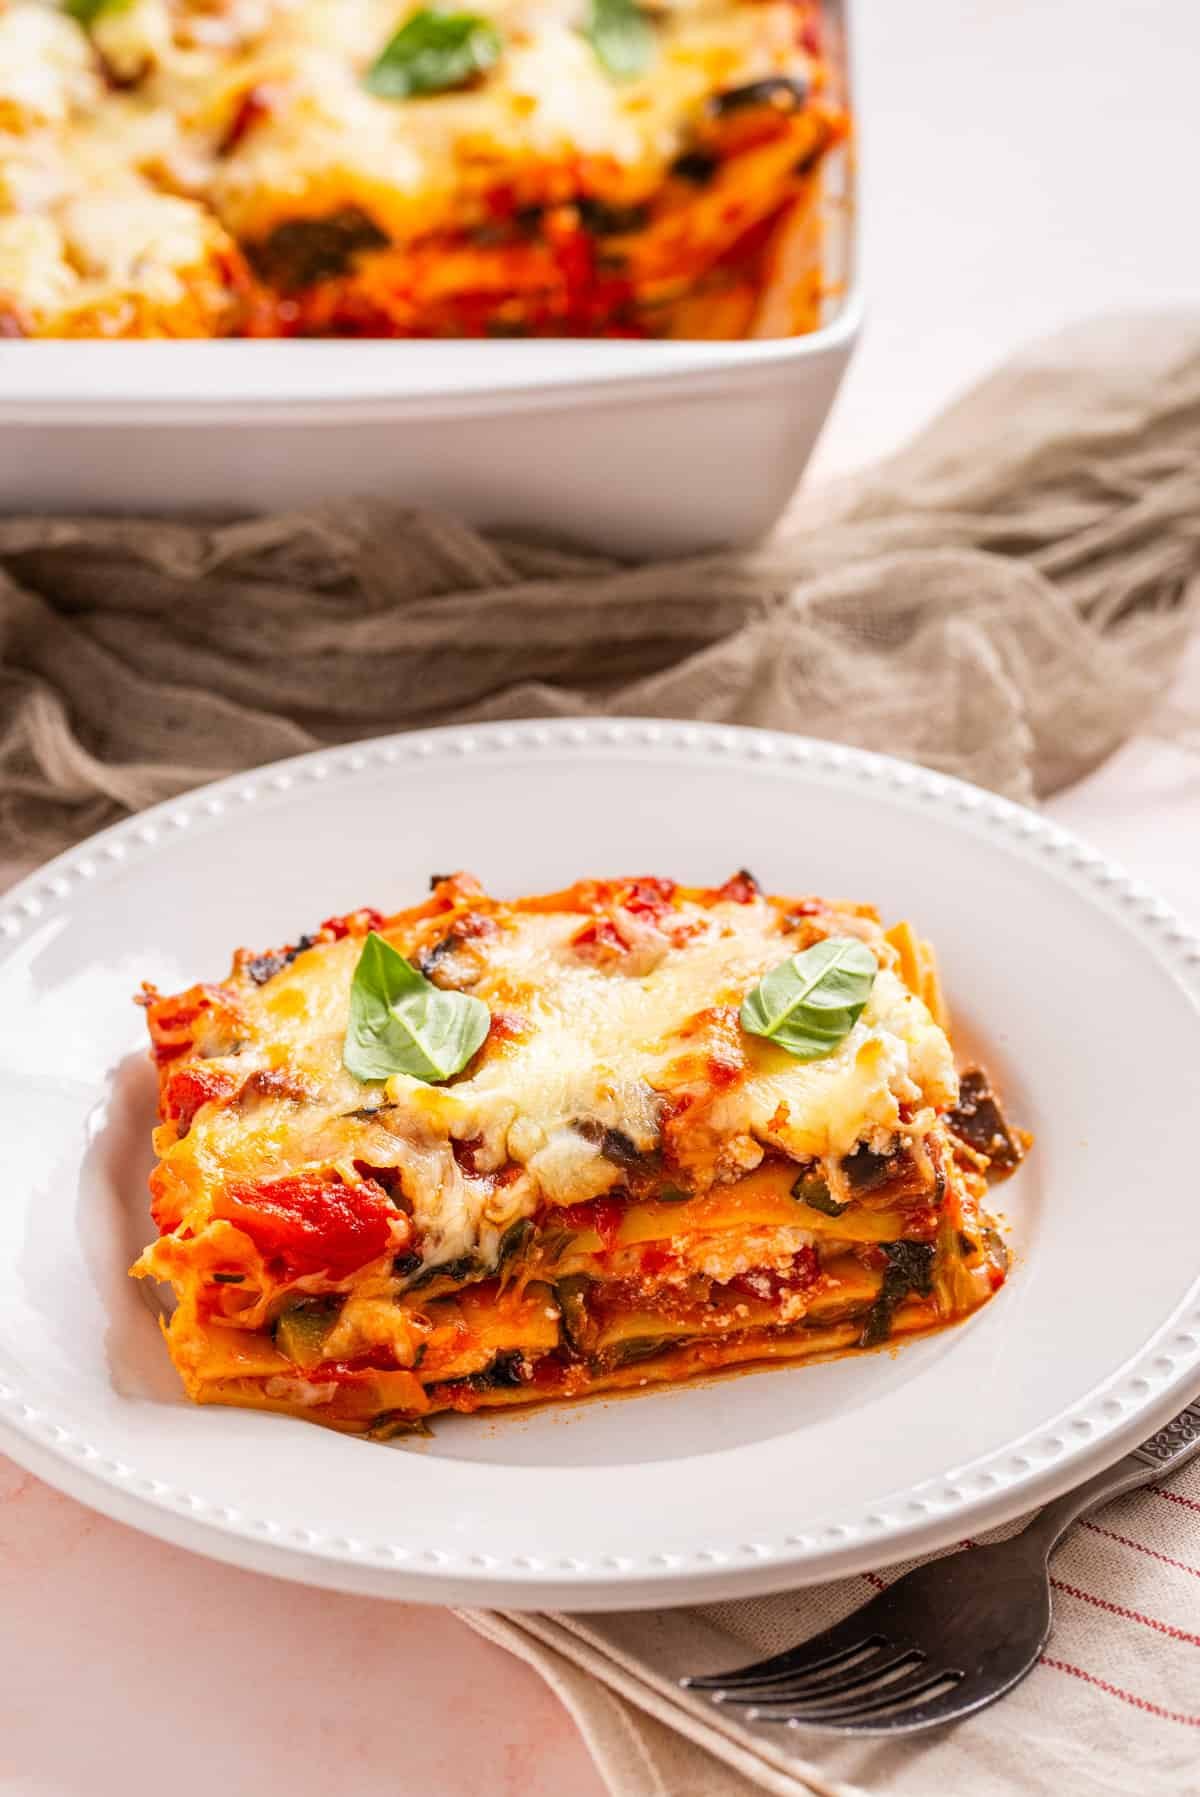 An image of a slice of vegetable lasagna in a white serving dish.